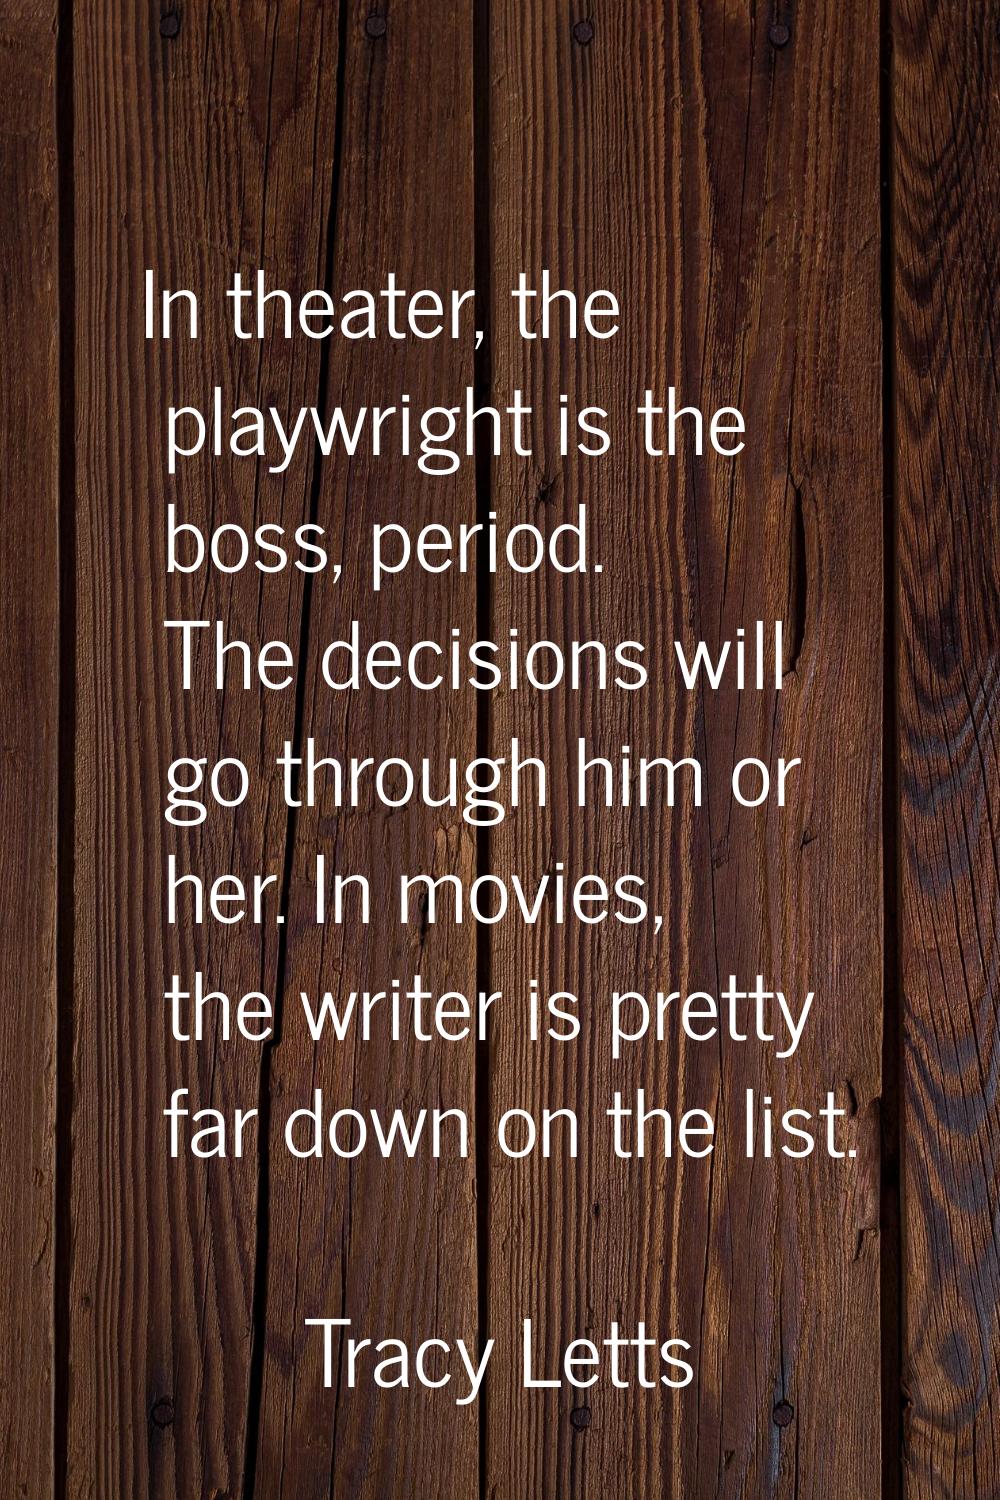 In theater, the playwright is the boss, period. The decisions will go through him or her. In movies